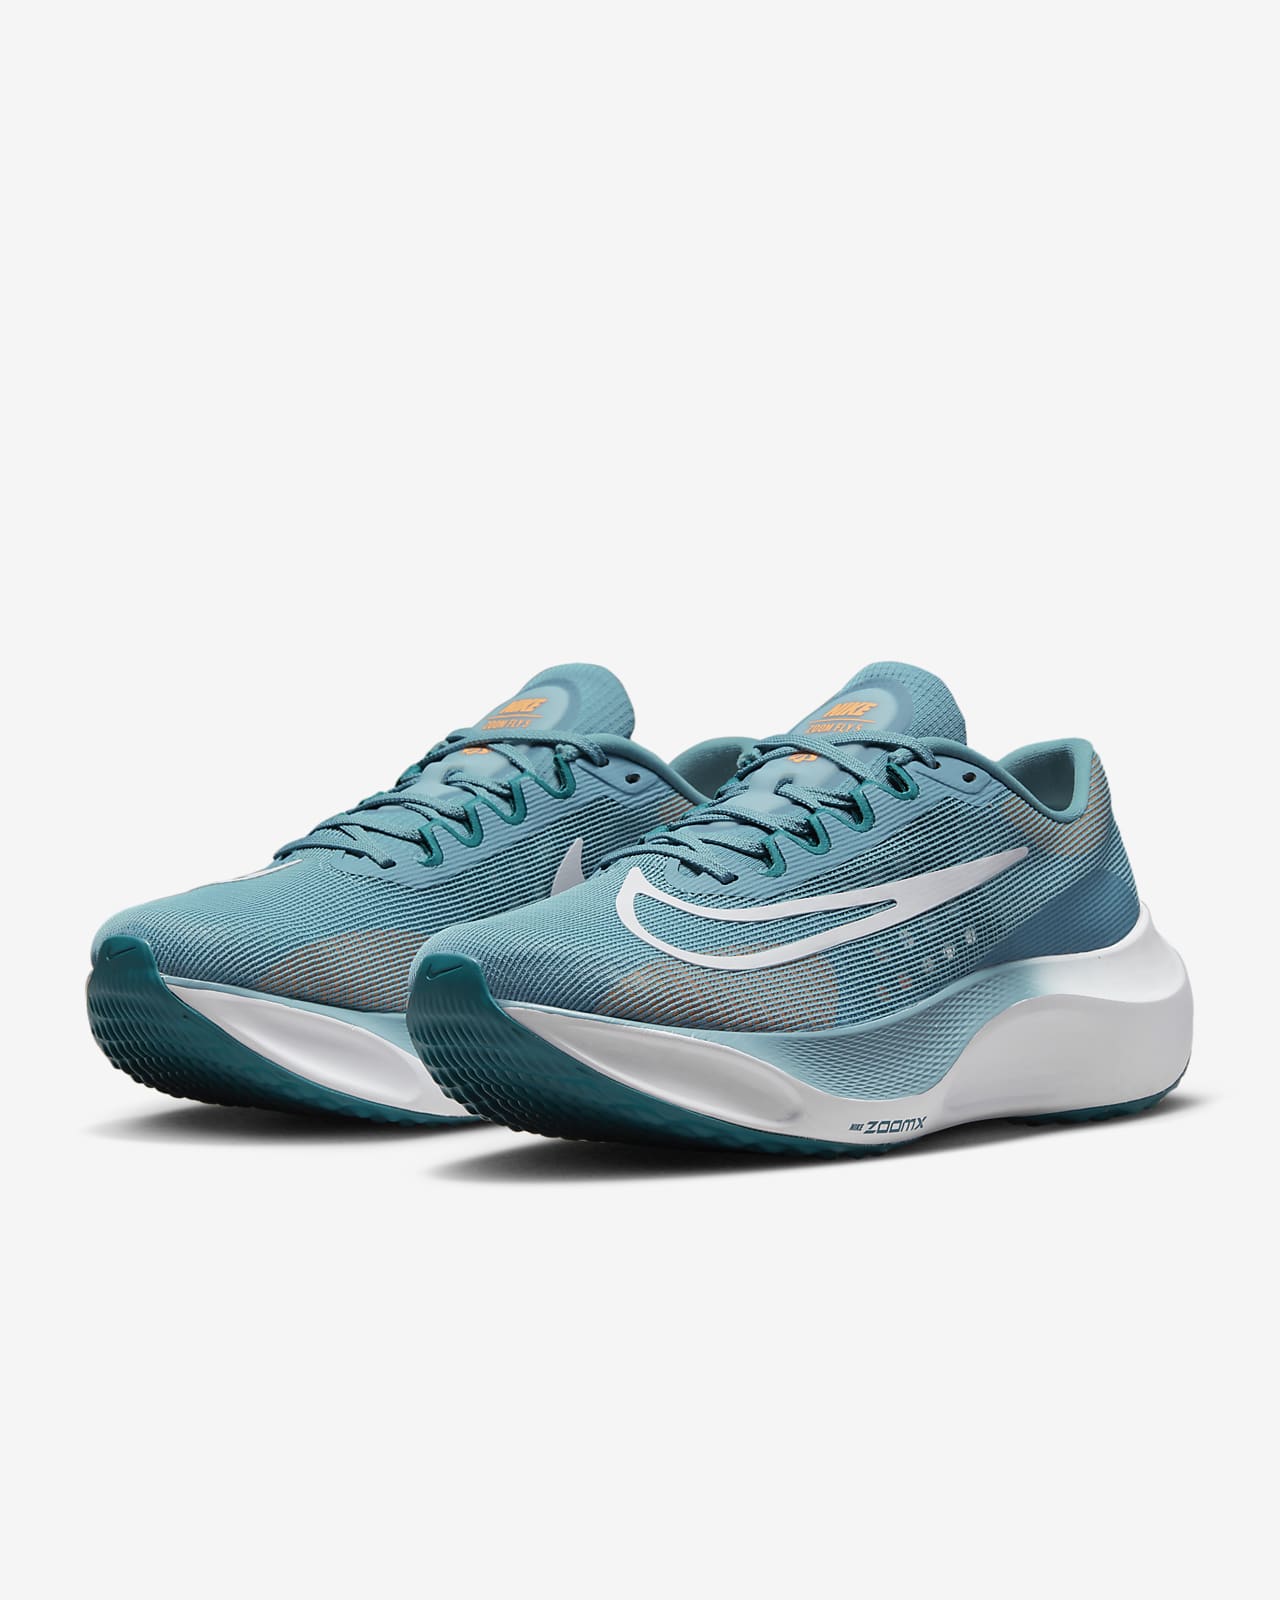 Nike Zoom Fly 5 Men's Road Running Shoes. Nike SG